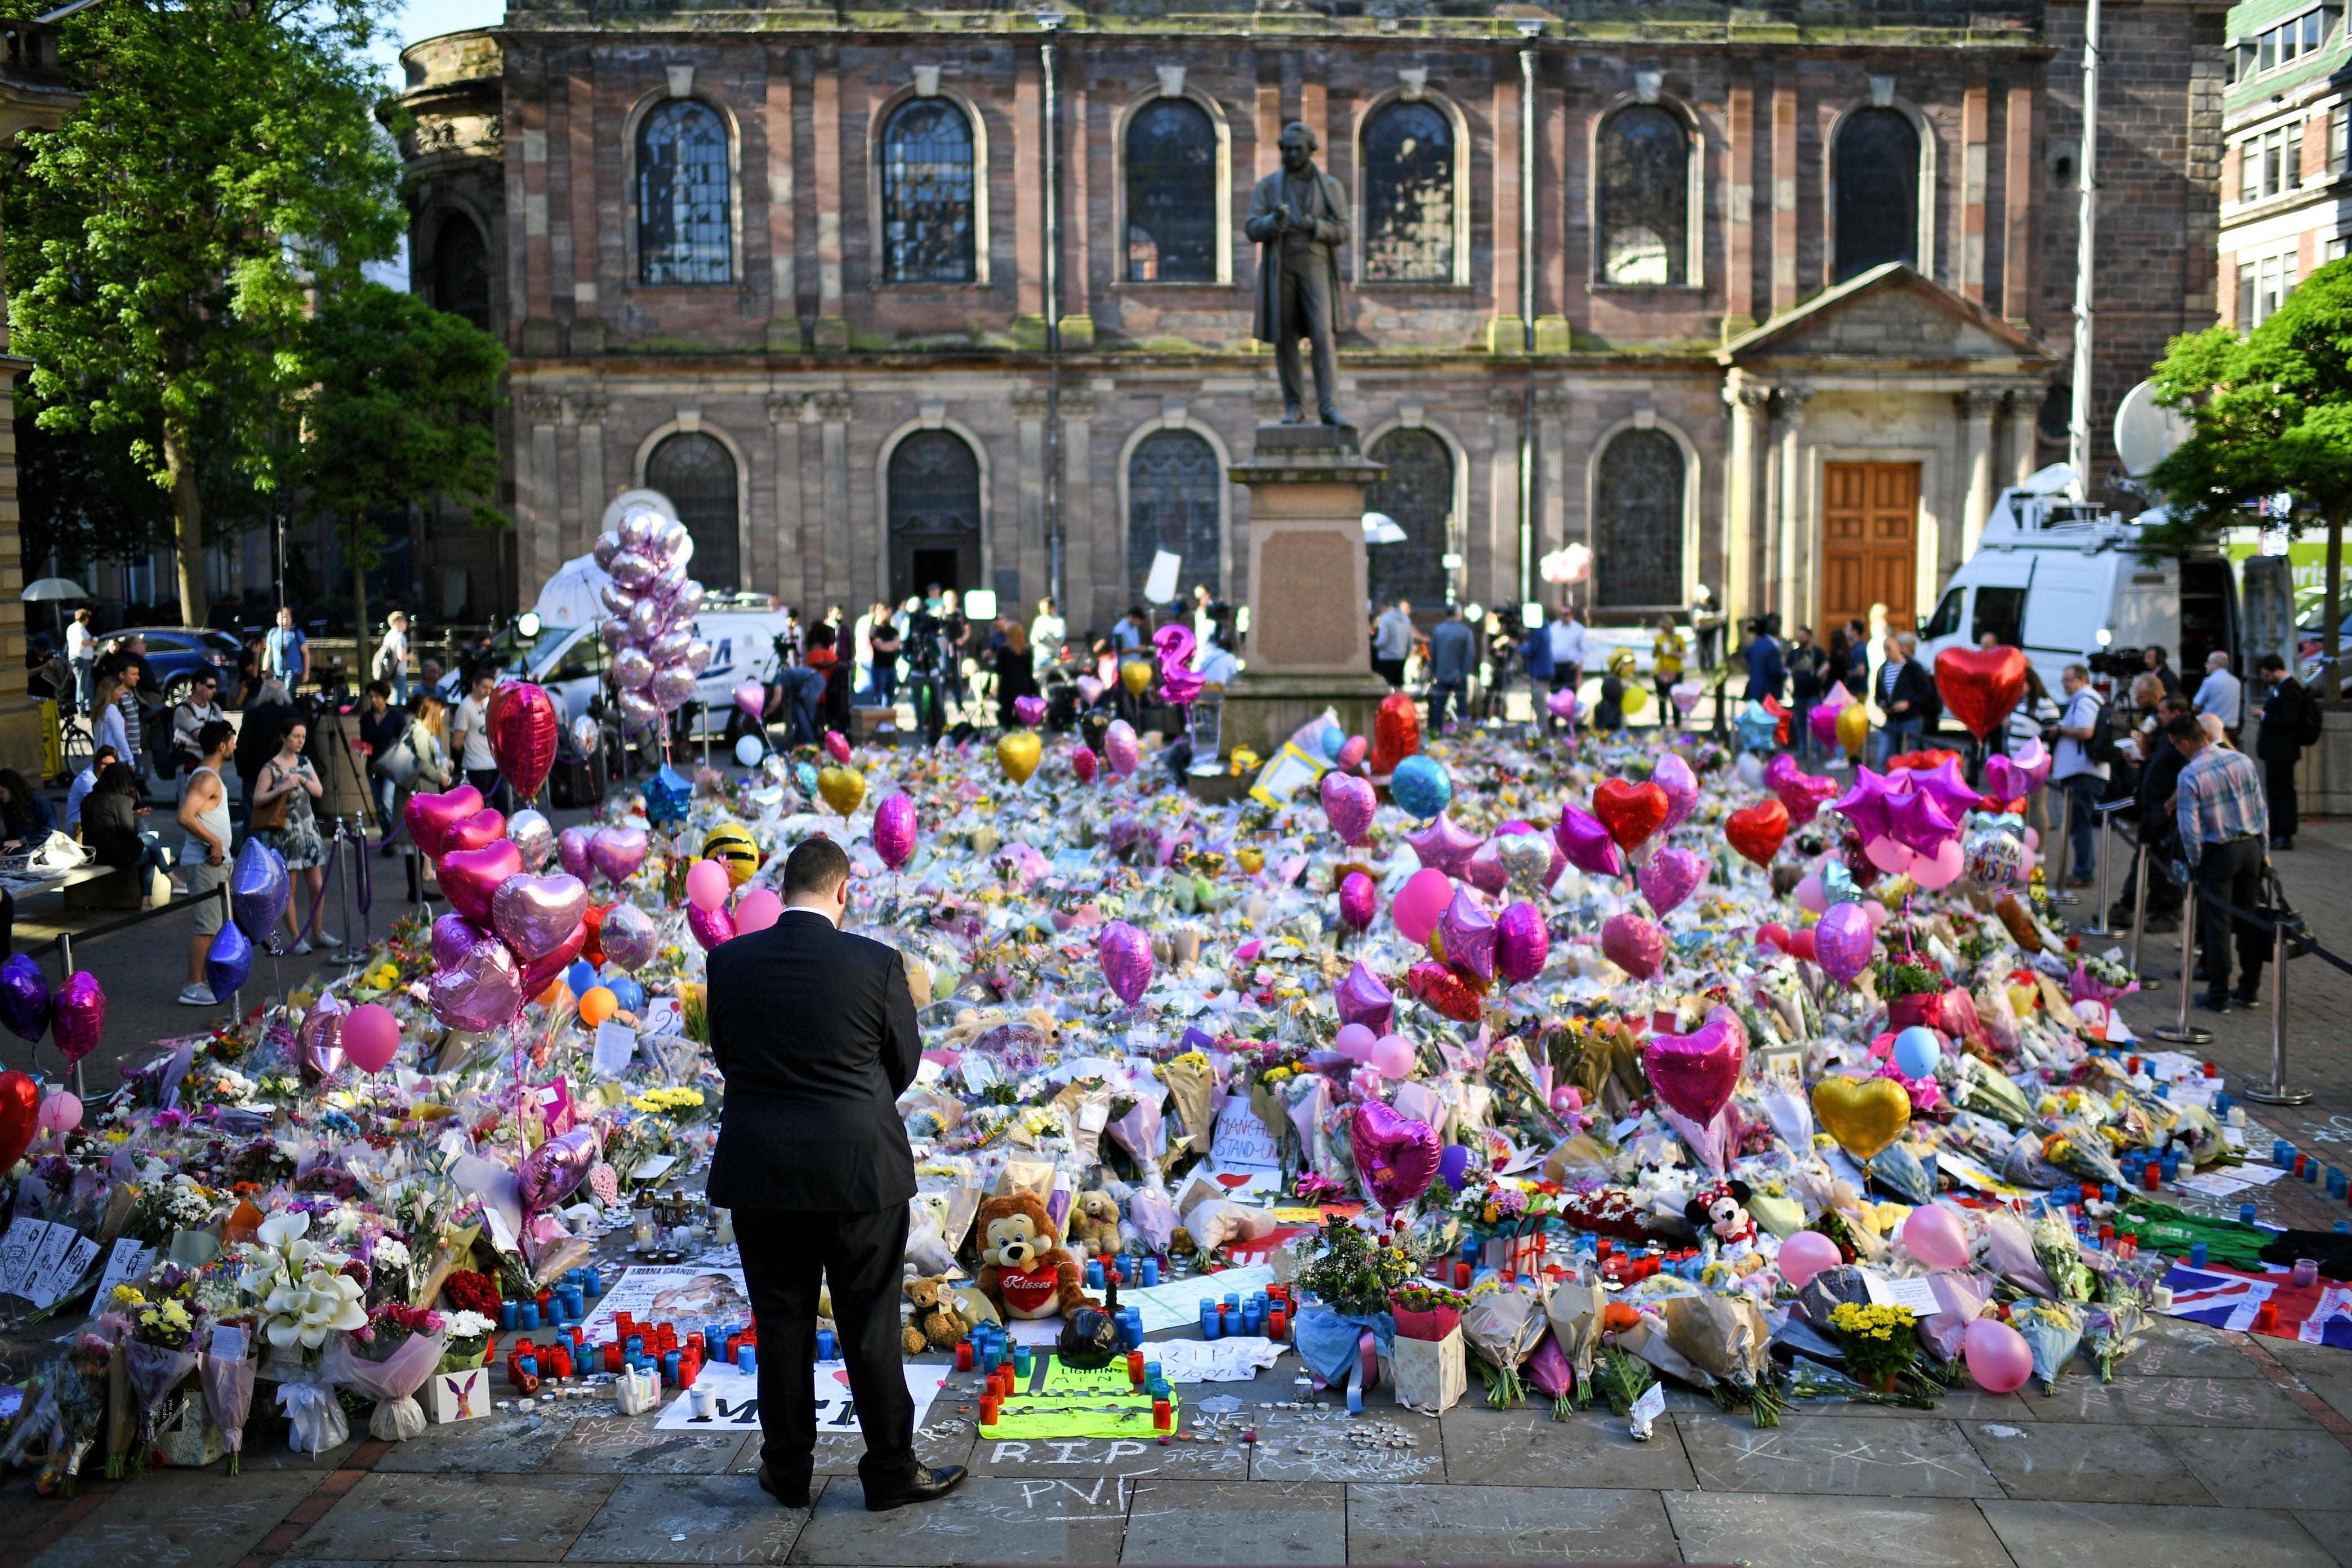 Members of the public look at tributes left in St Ann's Square for the people who died in Monday's terror attack at the Manchester Arena on May 26, 2017 in Manchester, England. (Jeff J Mitchell—Getty Images)